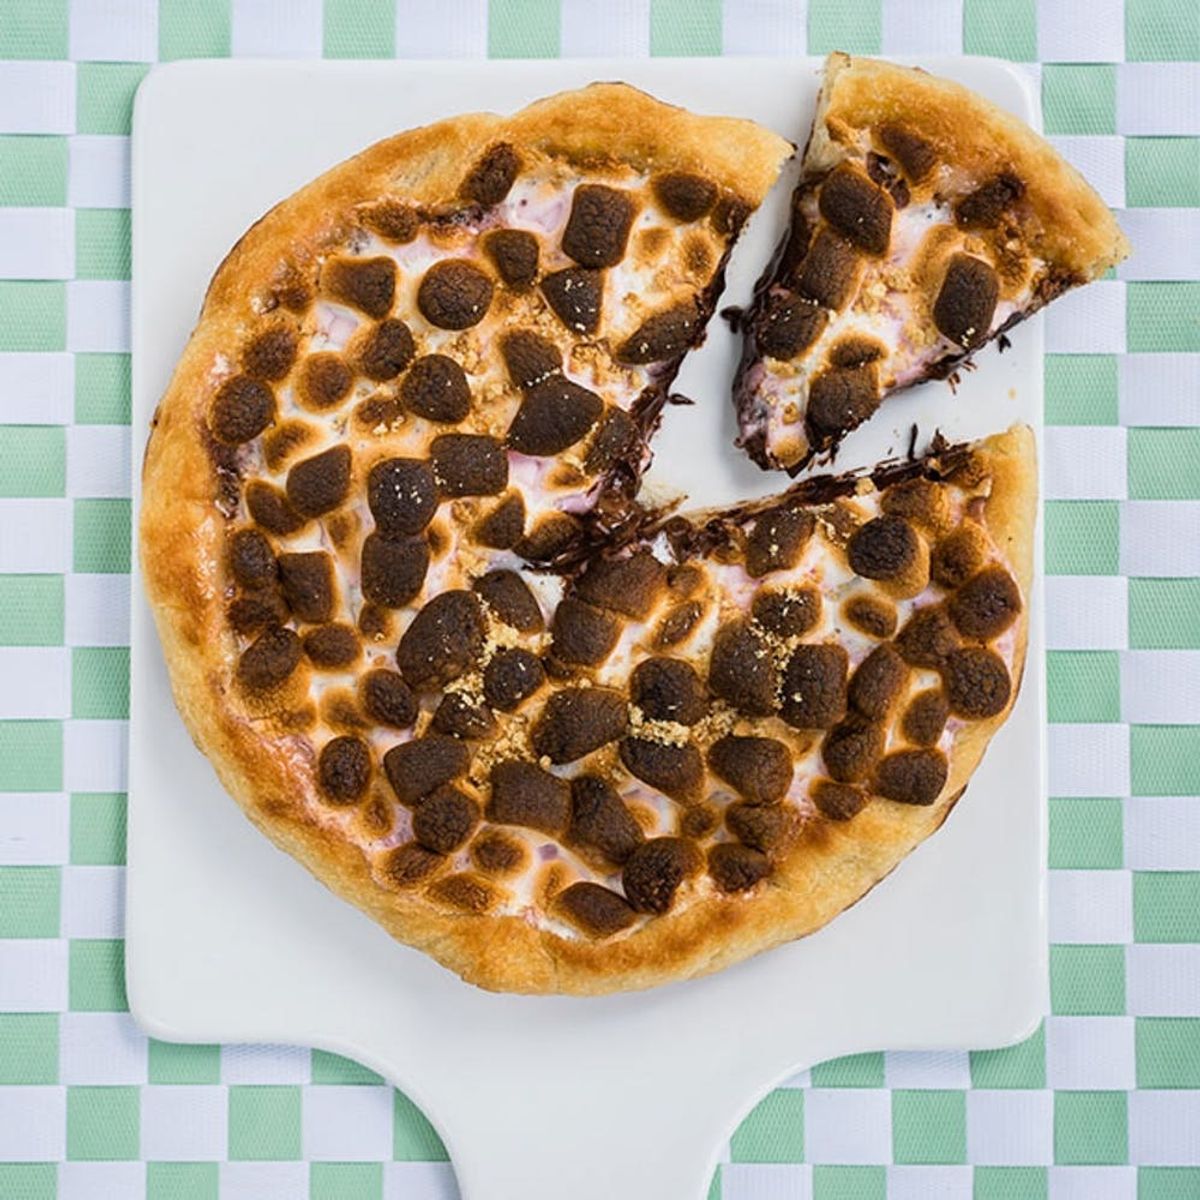 You’ll Want S’more of This Dessert Pizza